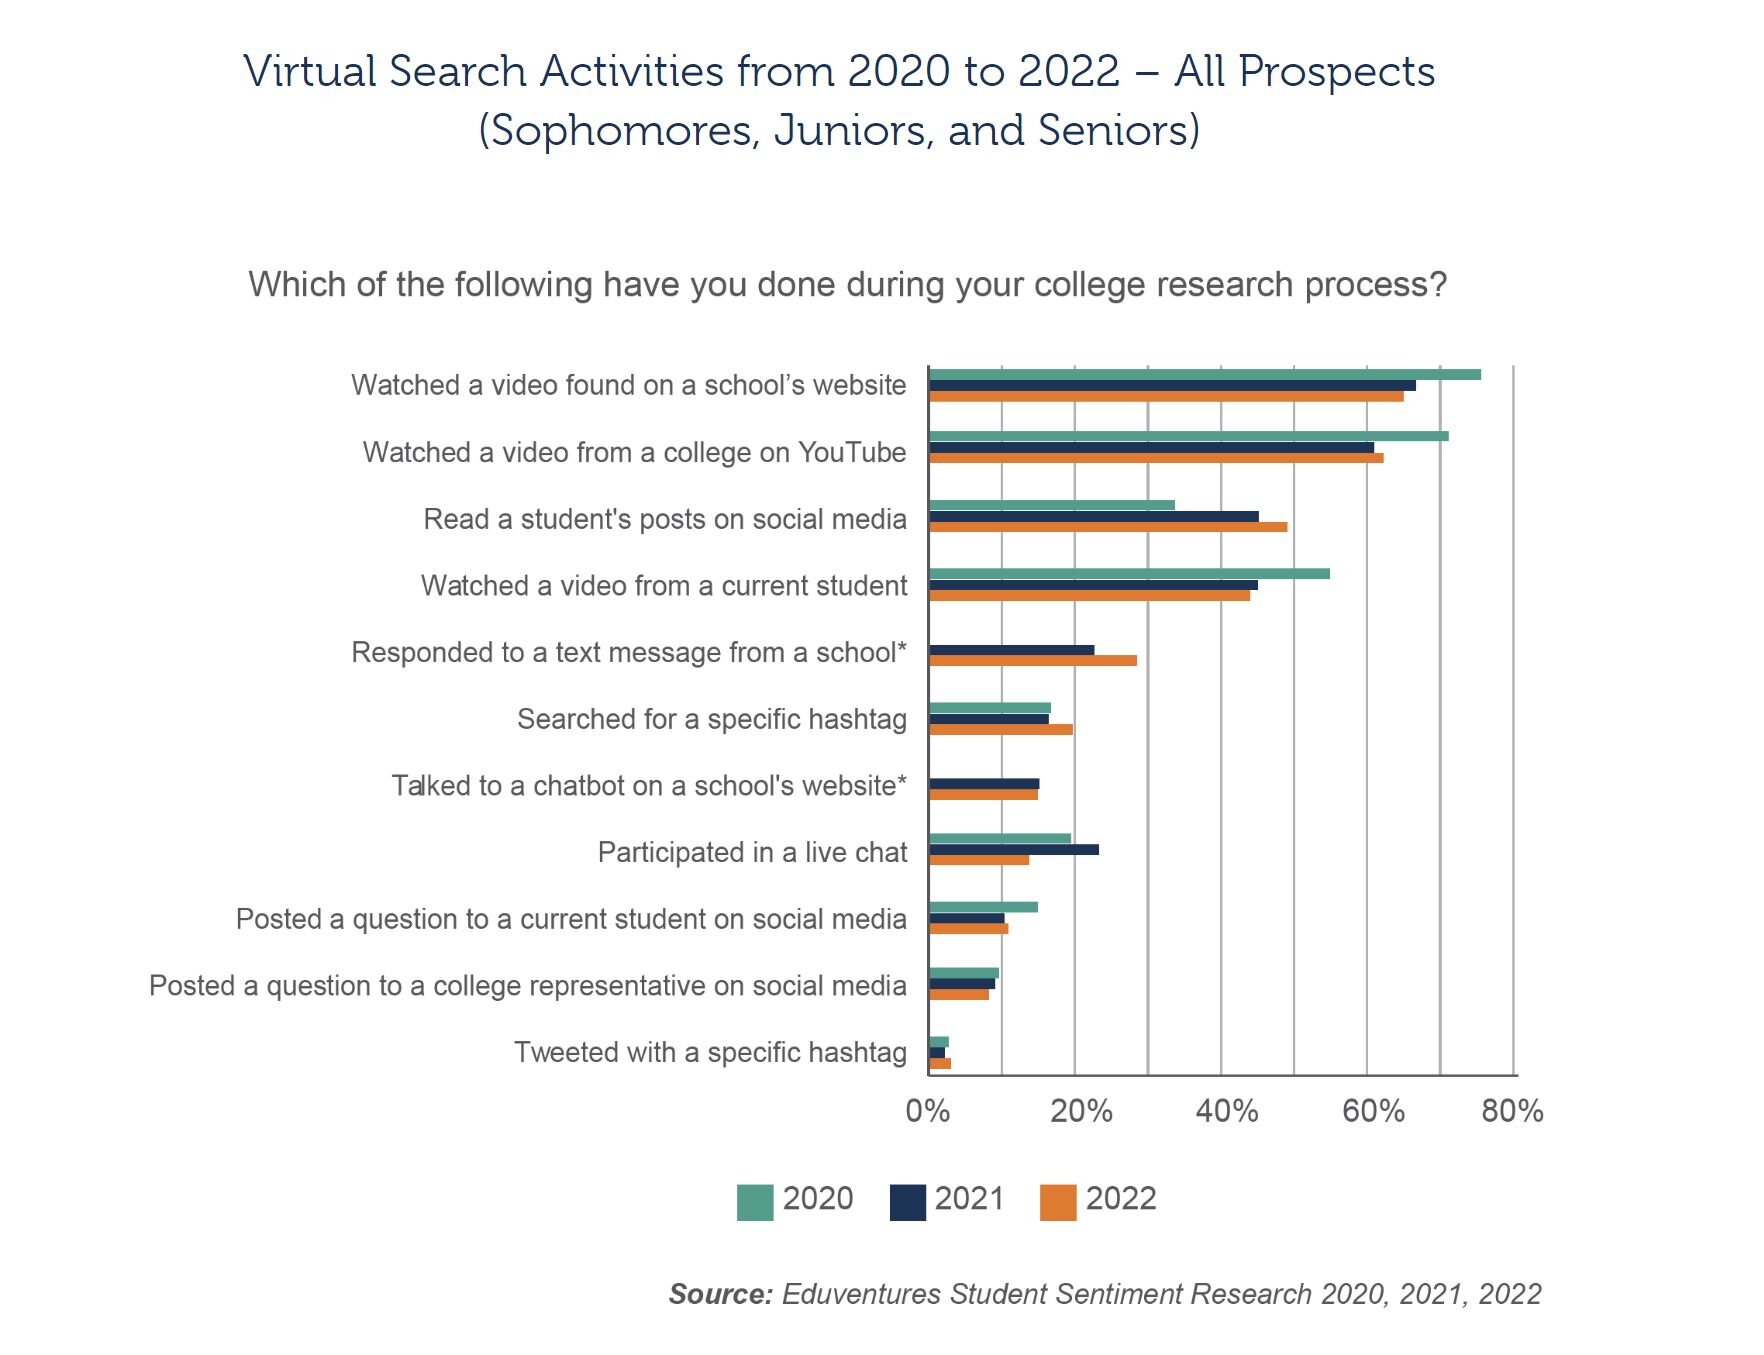 Virtual Search Activities from 2020 - 2022